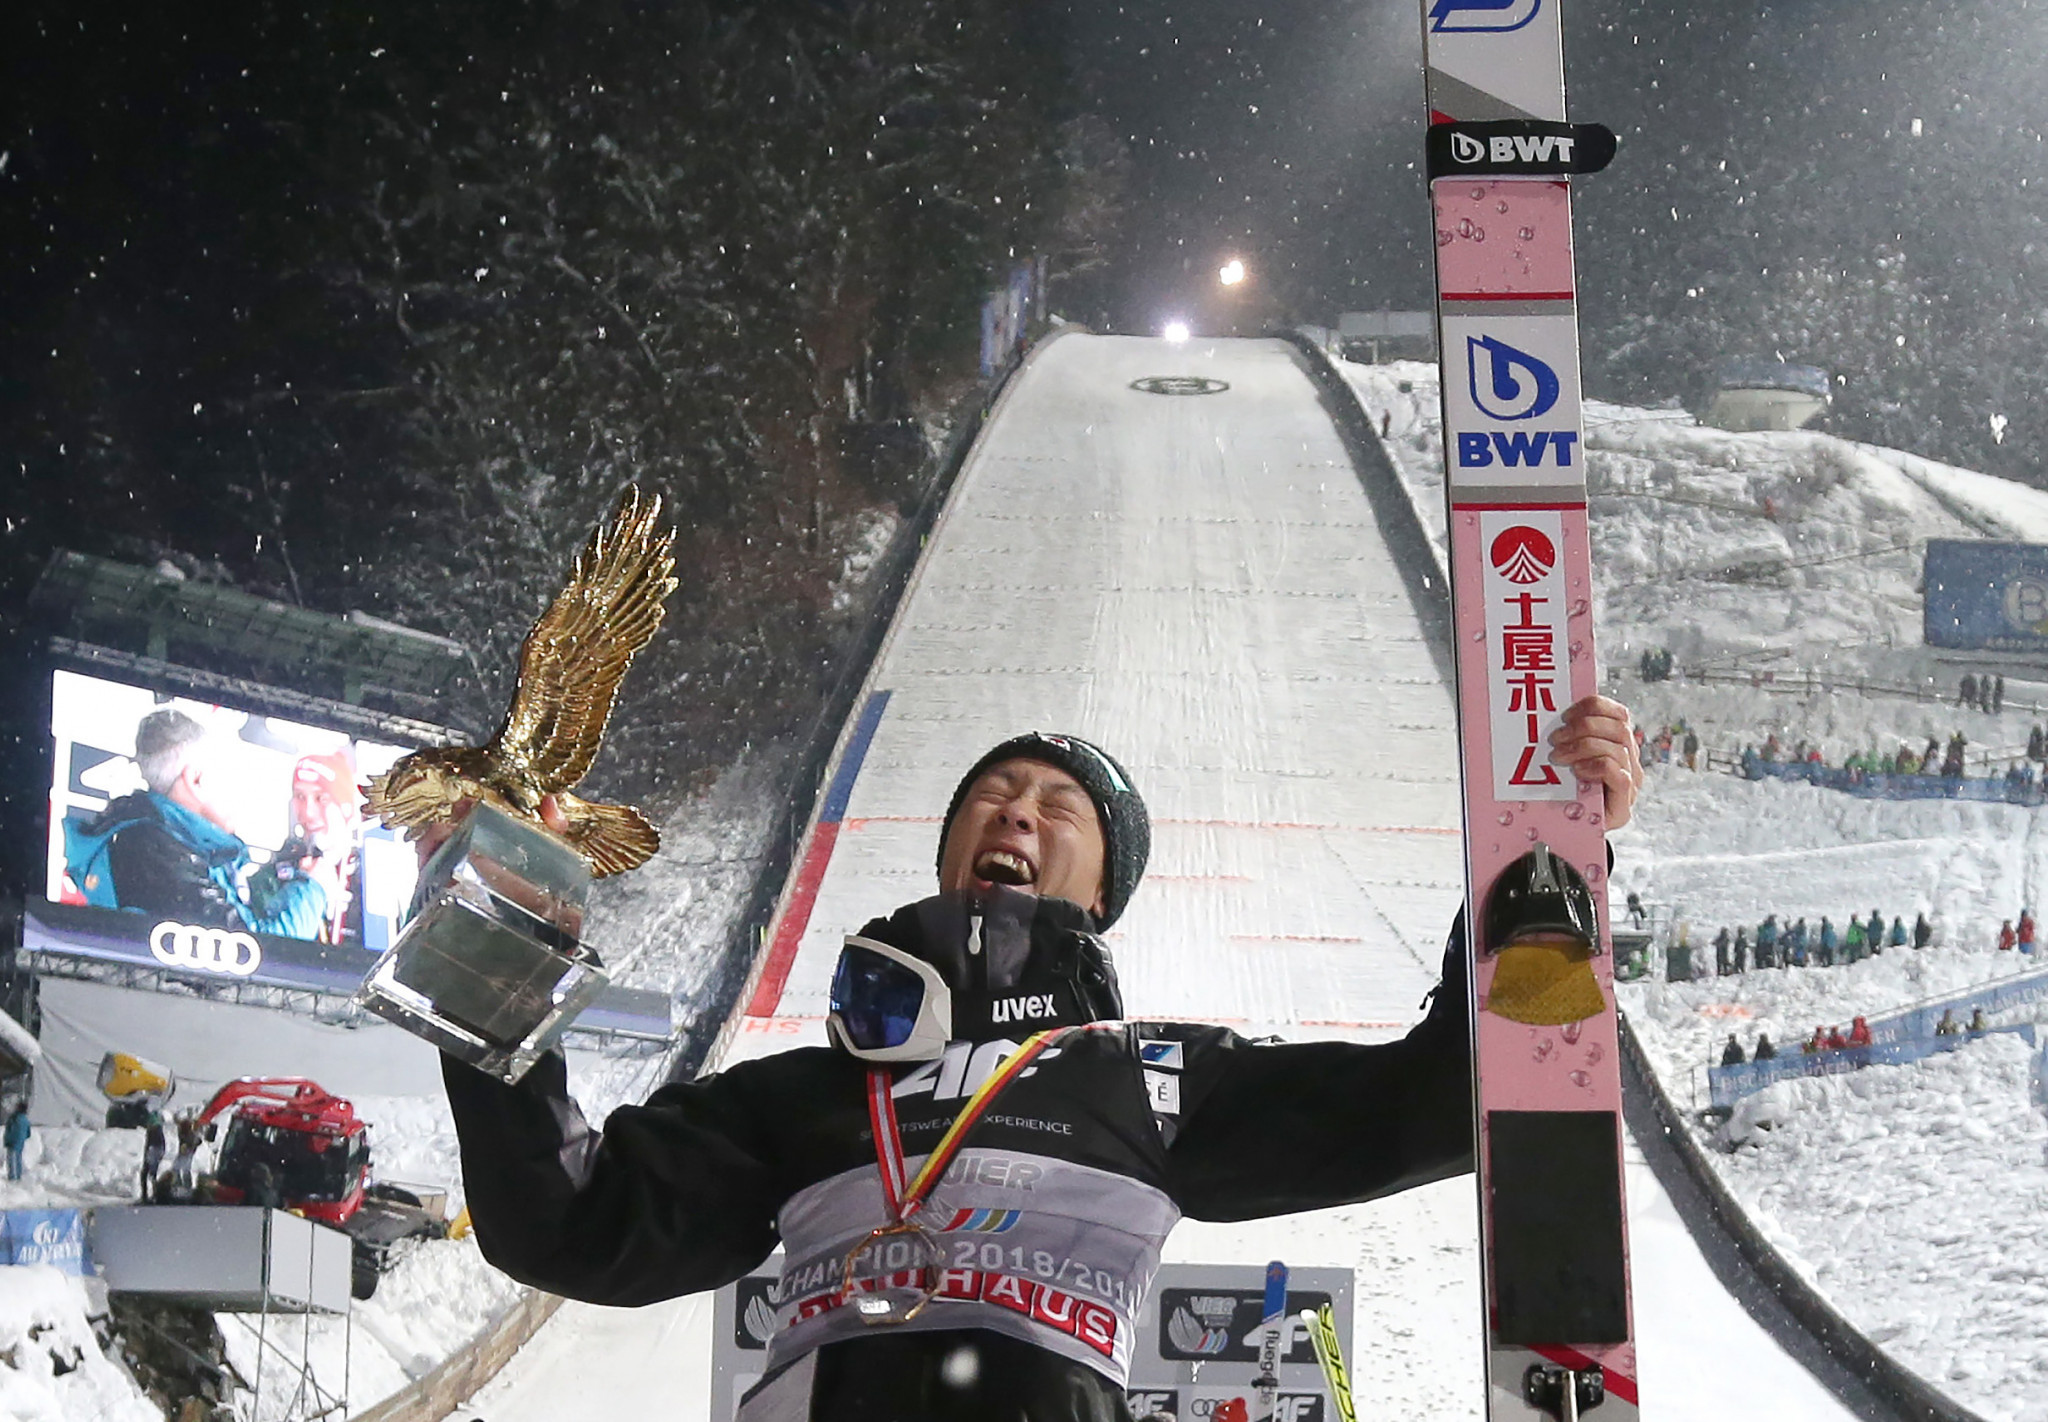 Ryoyu Kobayashi became the third man to achieve a clean sweep of the Four Hills Tournament events ©Getty Images